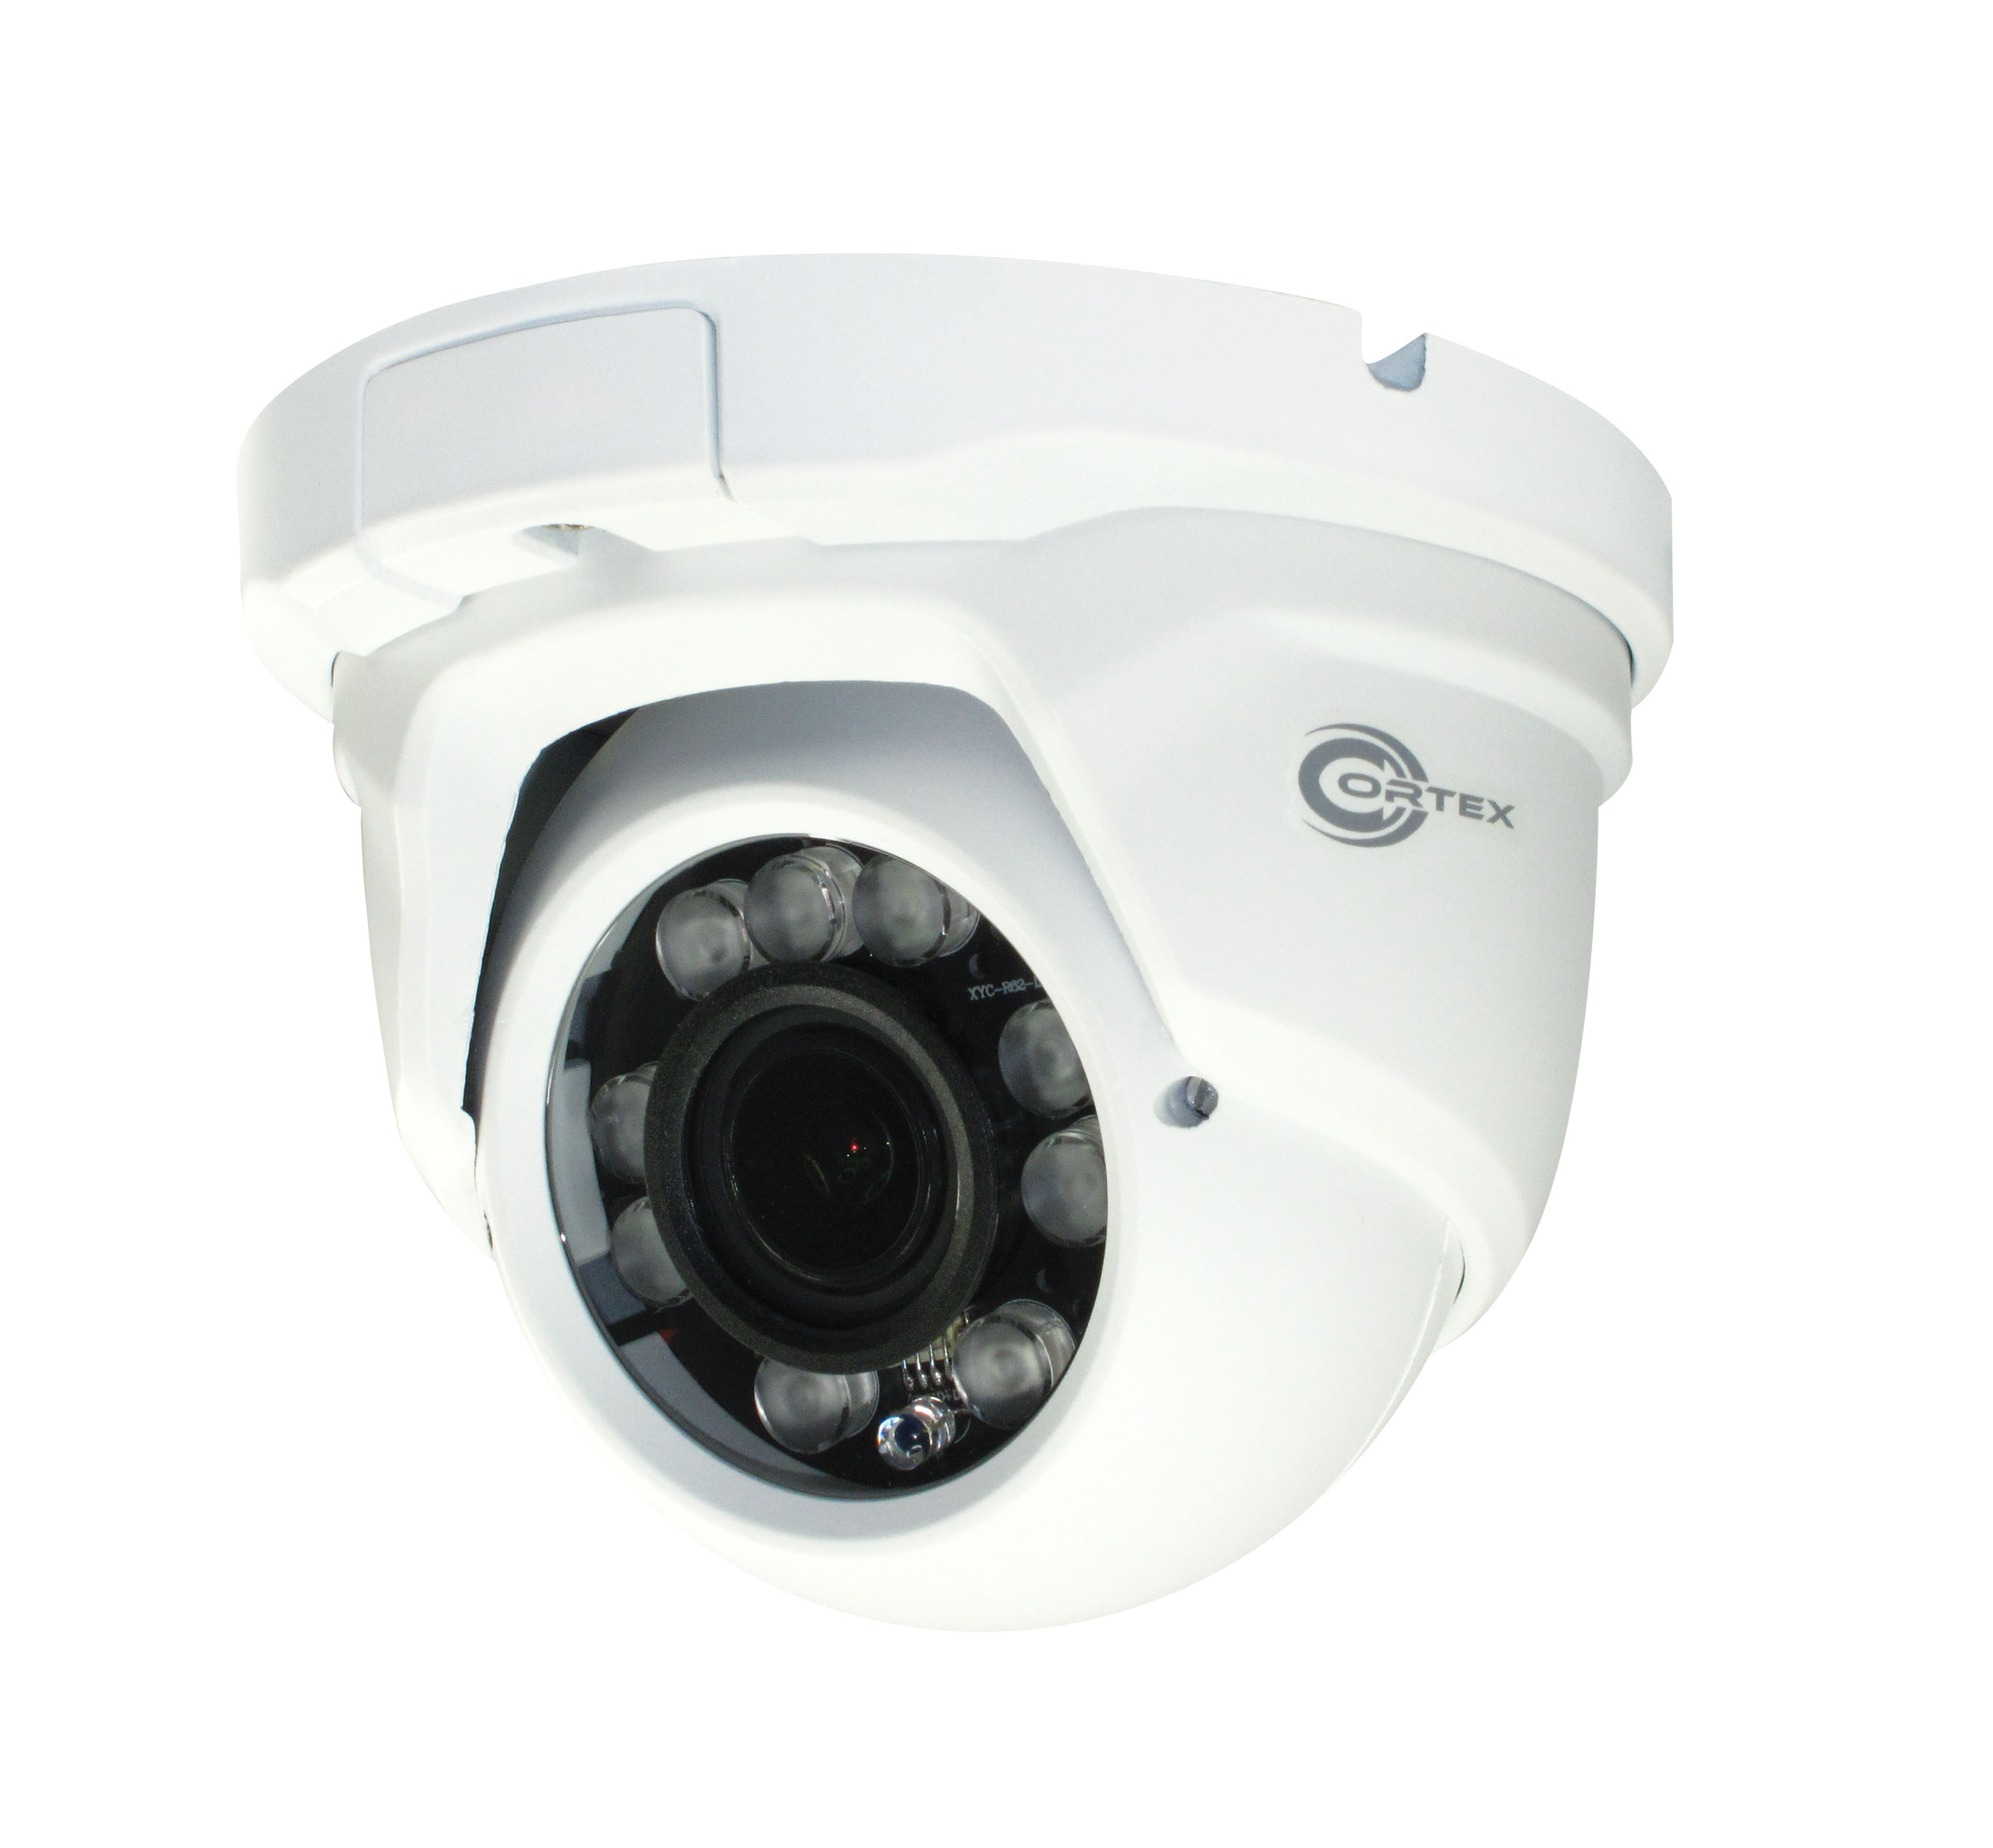  Medallion 5MP Network Camera with 2.8-12mm (Motorized Zoom + Auto Focus)